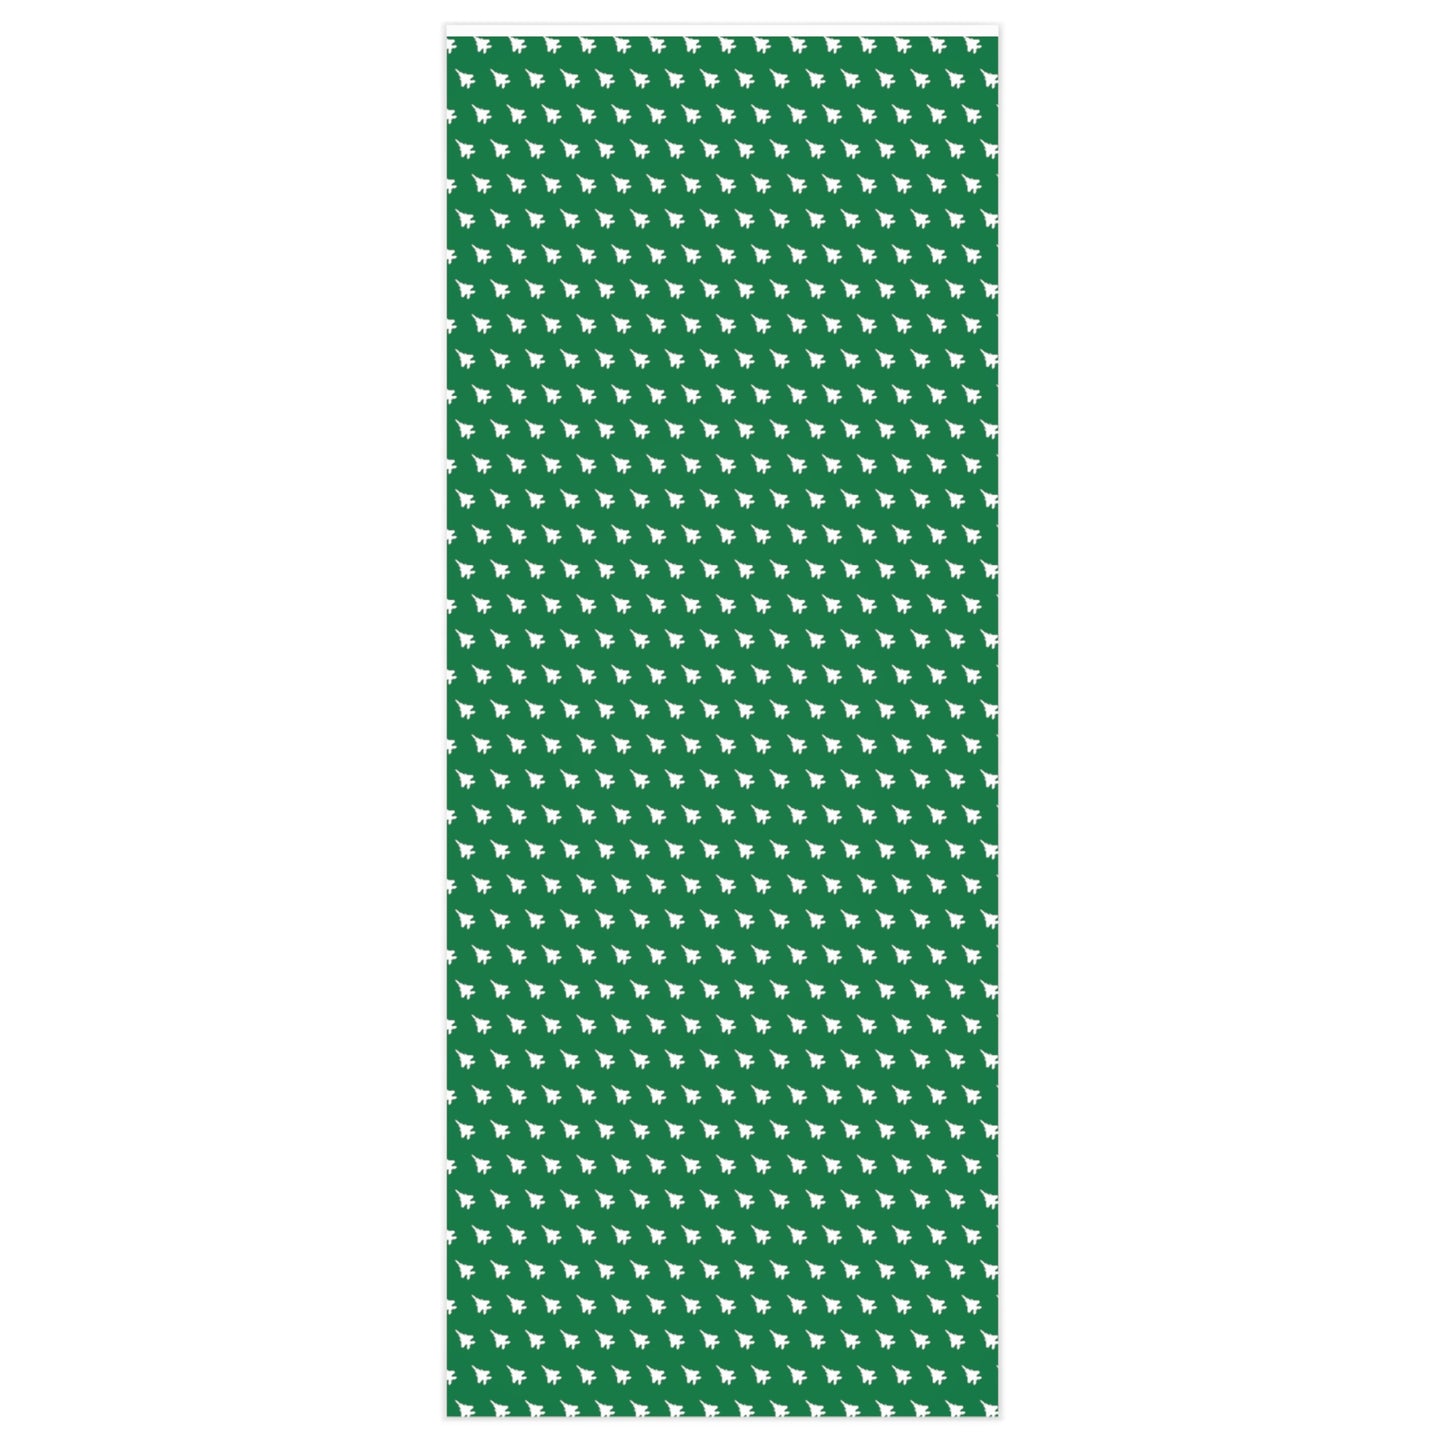 F-15 Wrapping Paper, Green